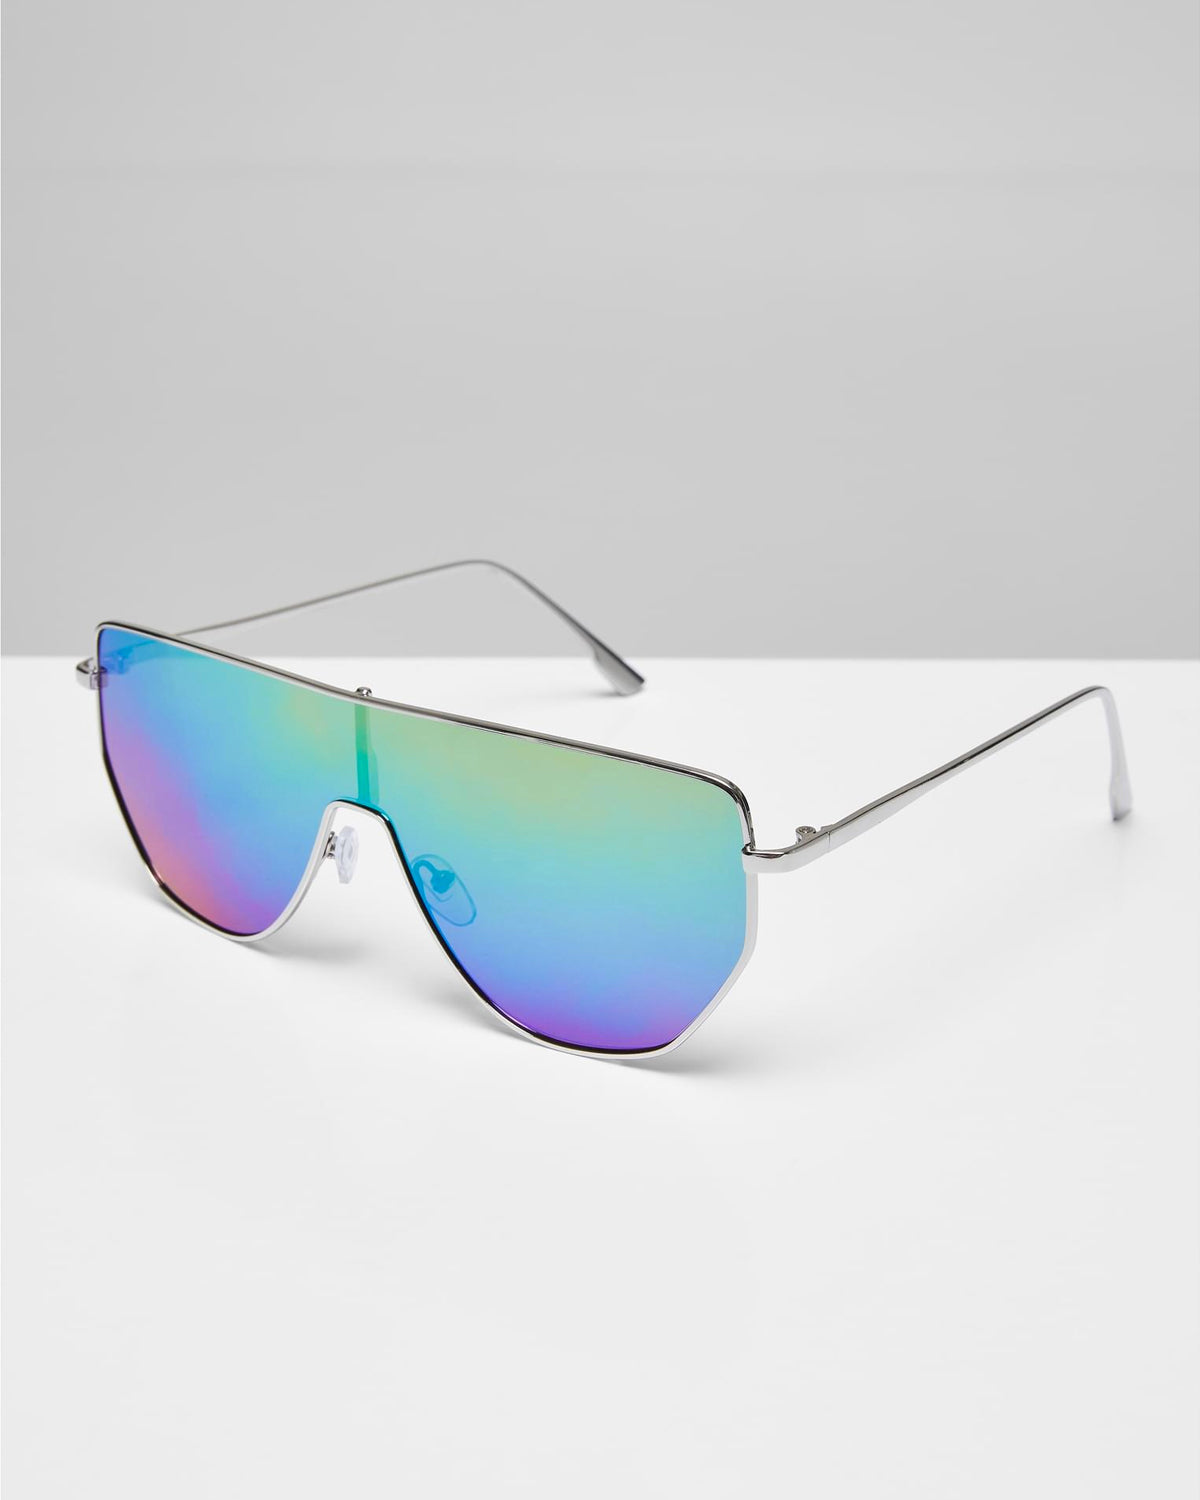 Men\'s sunglasses domestic store from online